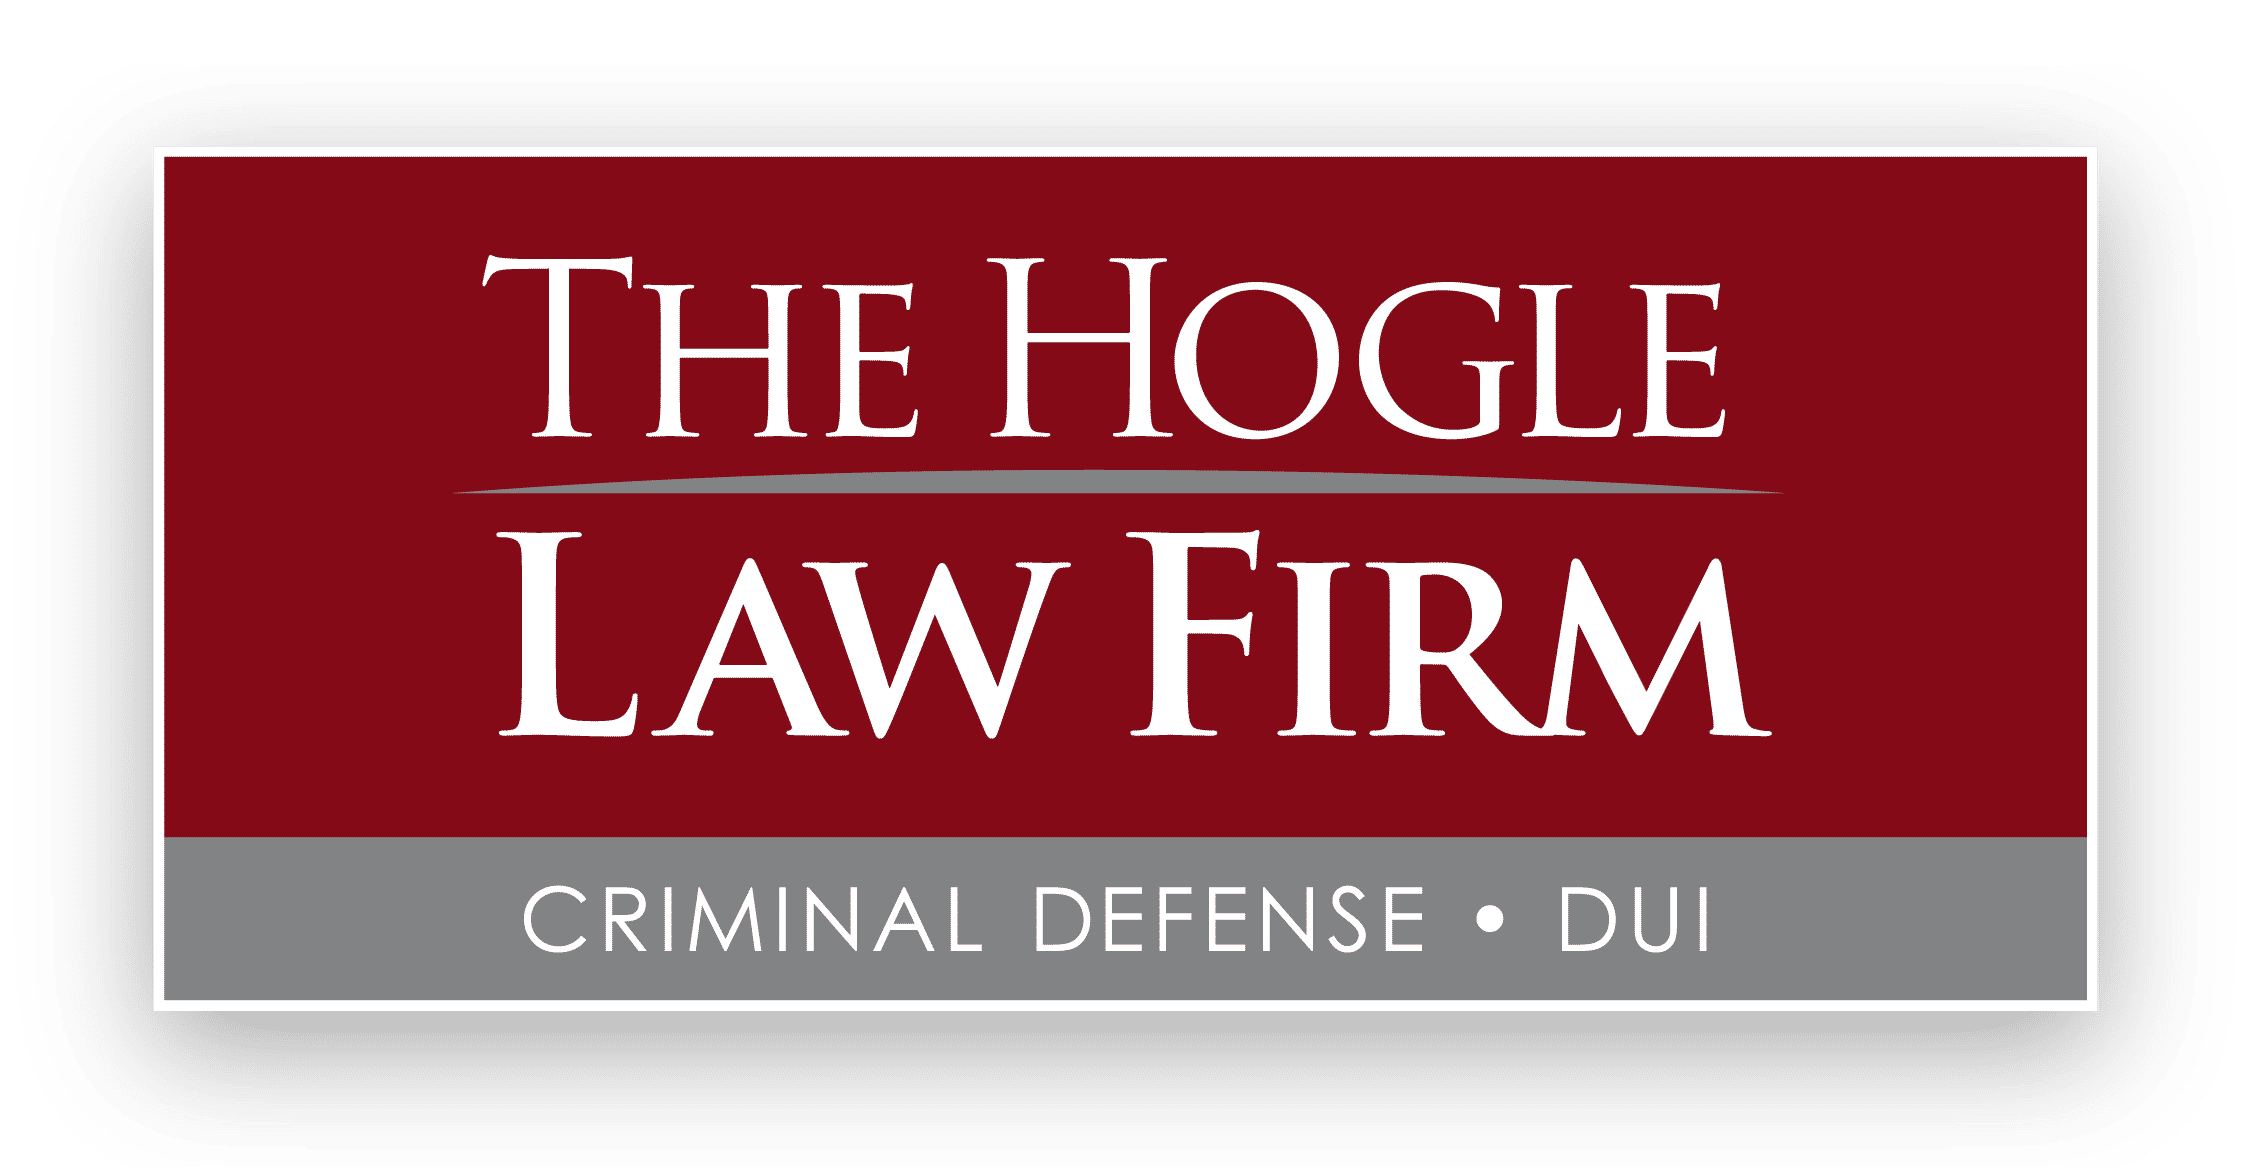 If You Ask Any Lawyer They'll Tell You Fighting A Legal Battle In Court Is Just One Of The Hardes ...